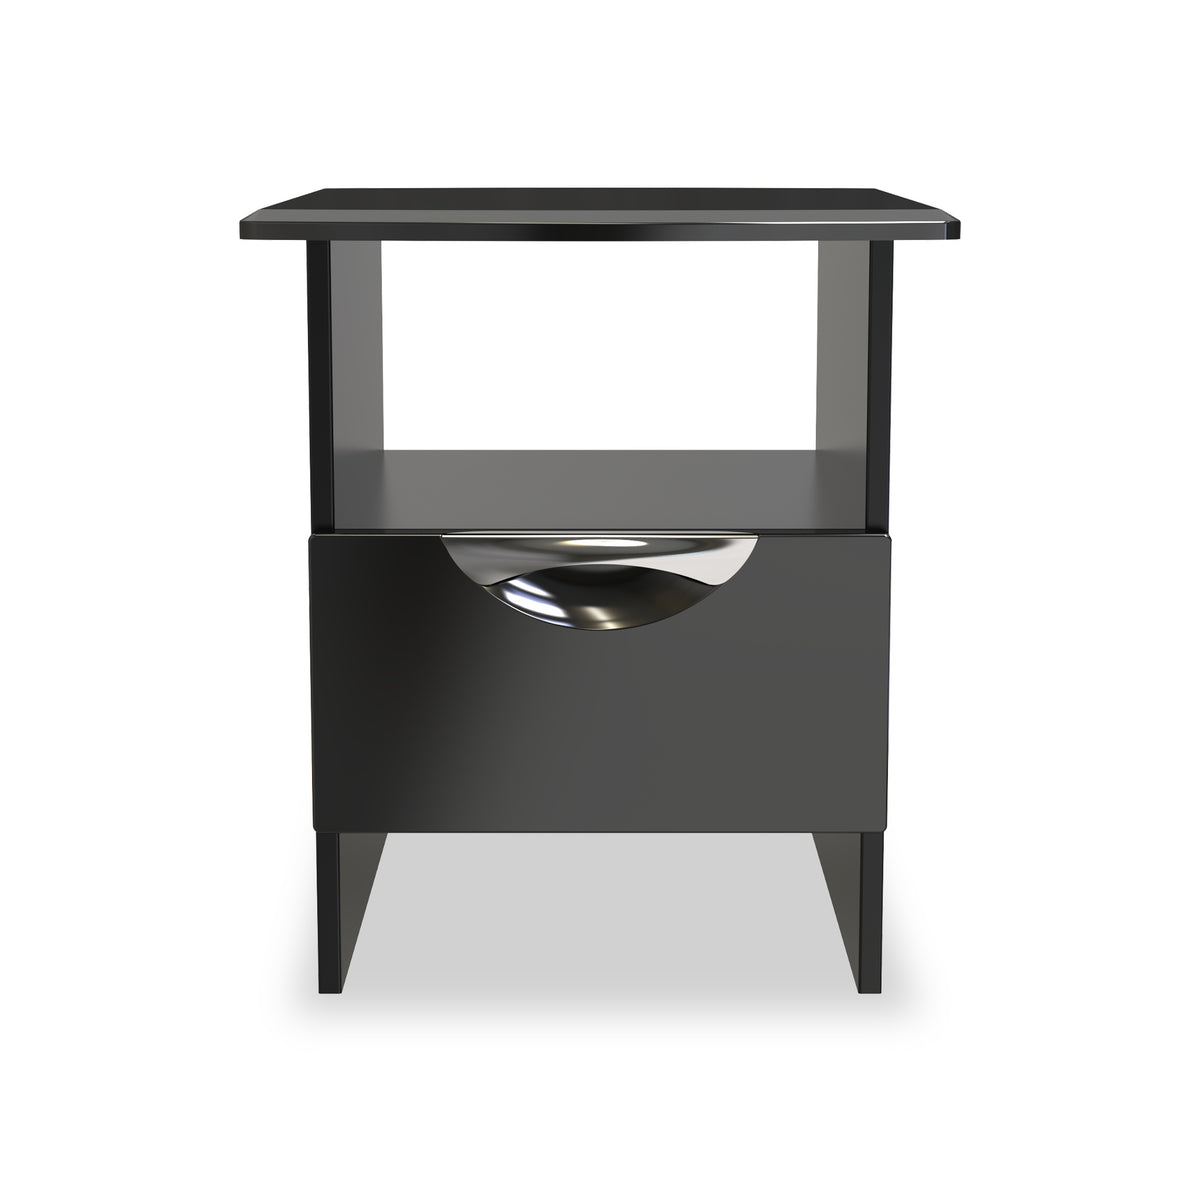 Beckett Black Gloss 1 Drawer with Open Shelf Lamp Table by Roseland Furniture